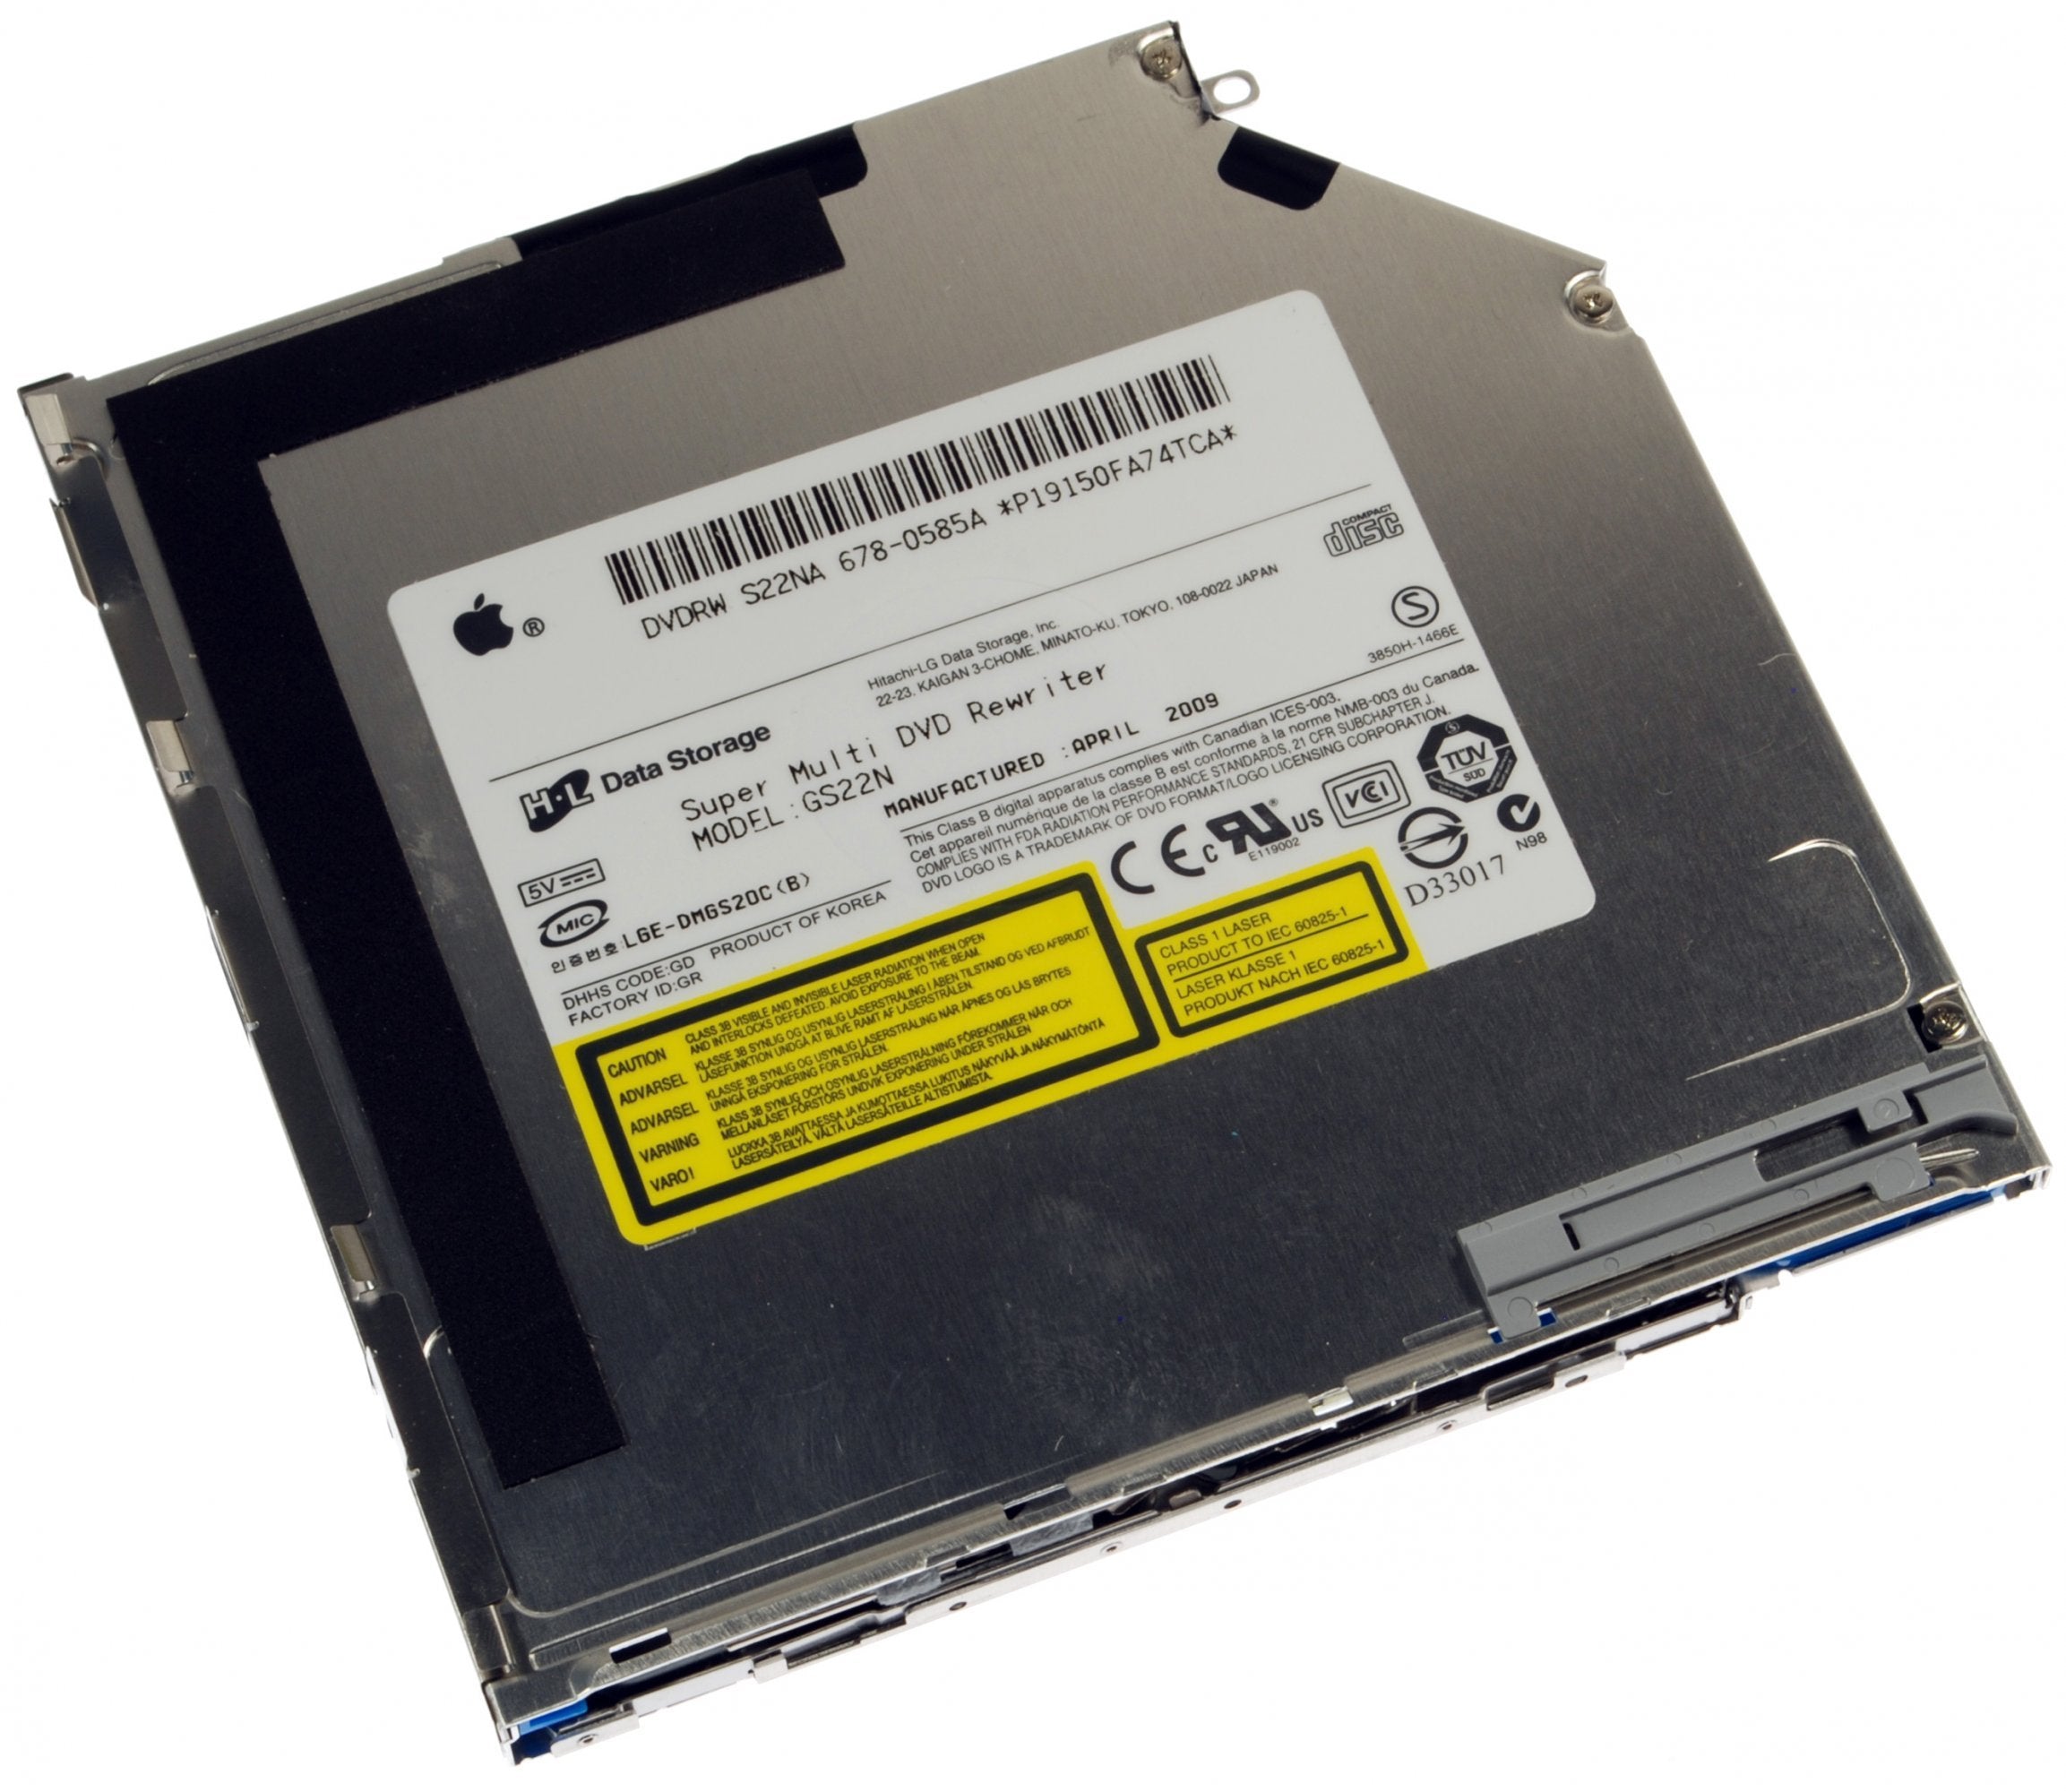 MacBook (Early-Mid 2009) 8x SuperDrive